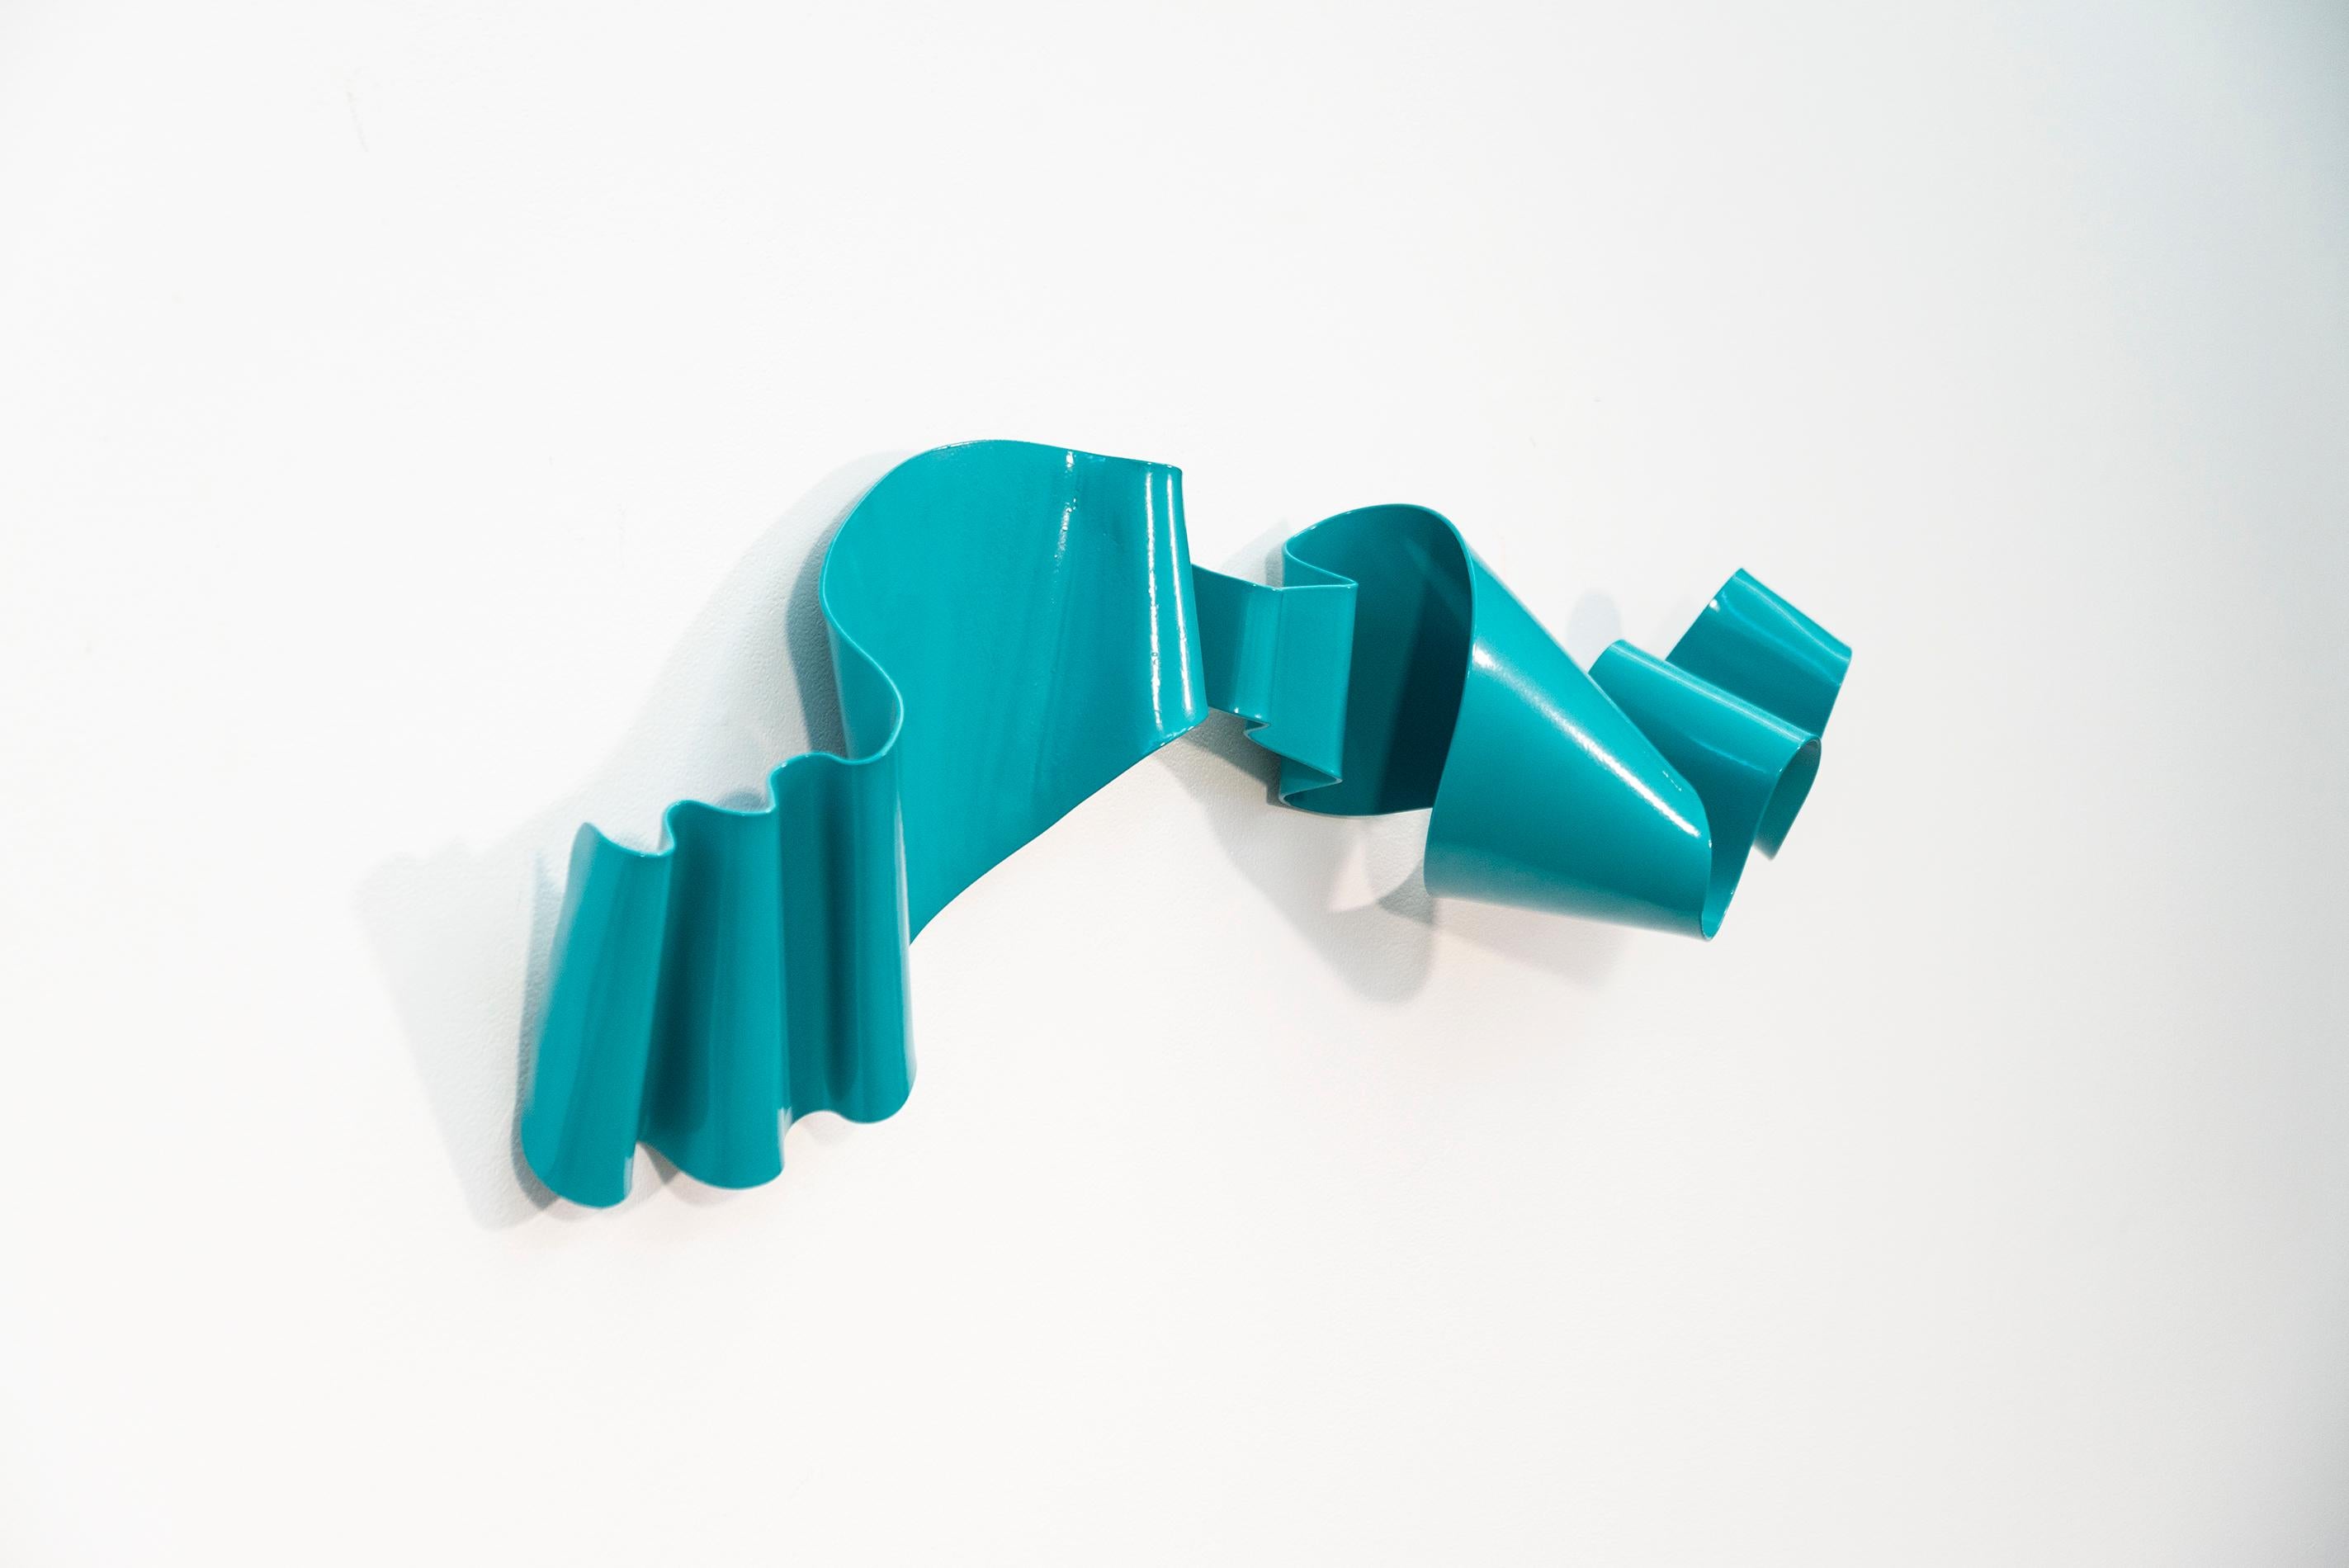 Soul Gate 46 - glossy, contemporary, ribbon, powder coated steel, wall sculpture - Sculpture by Stefan Duerst